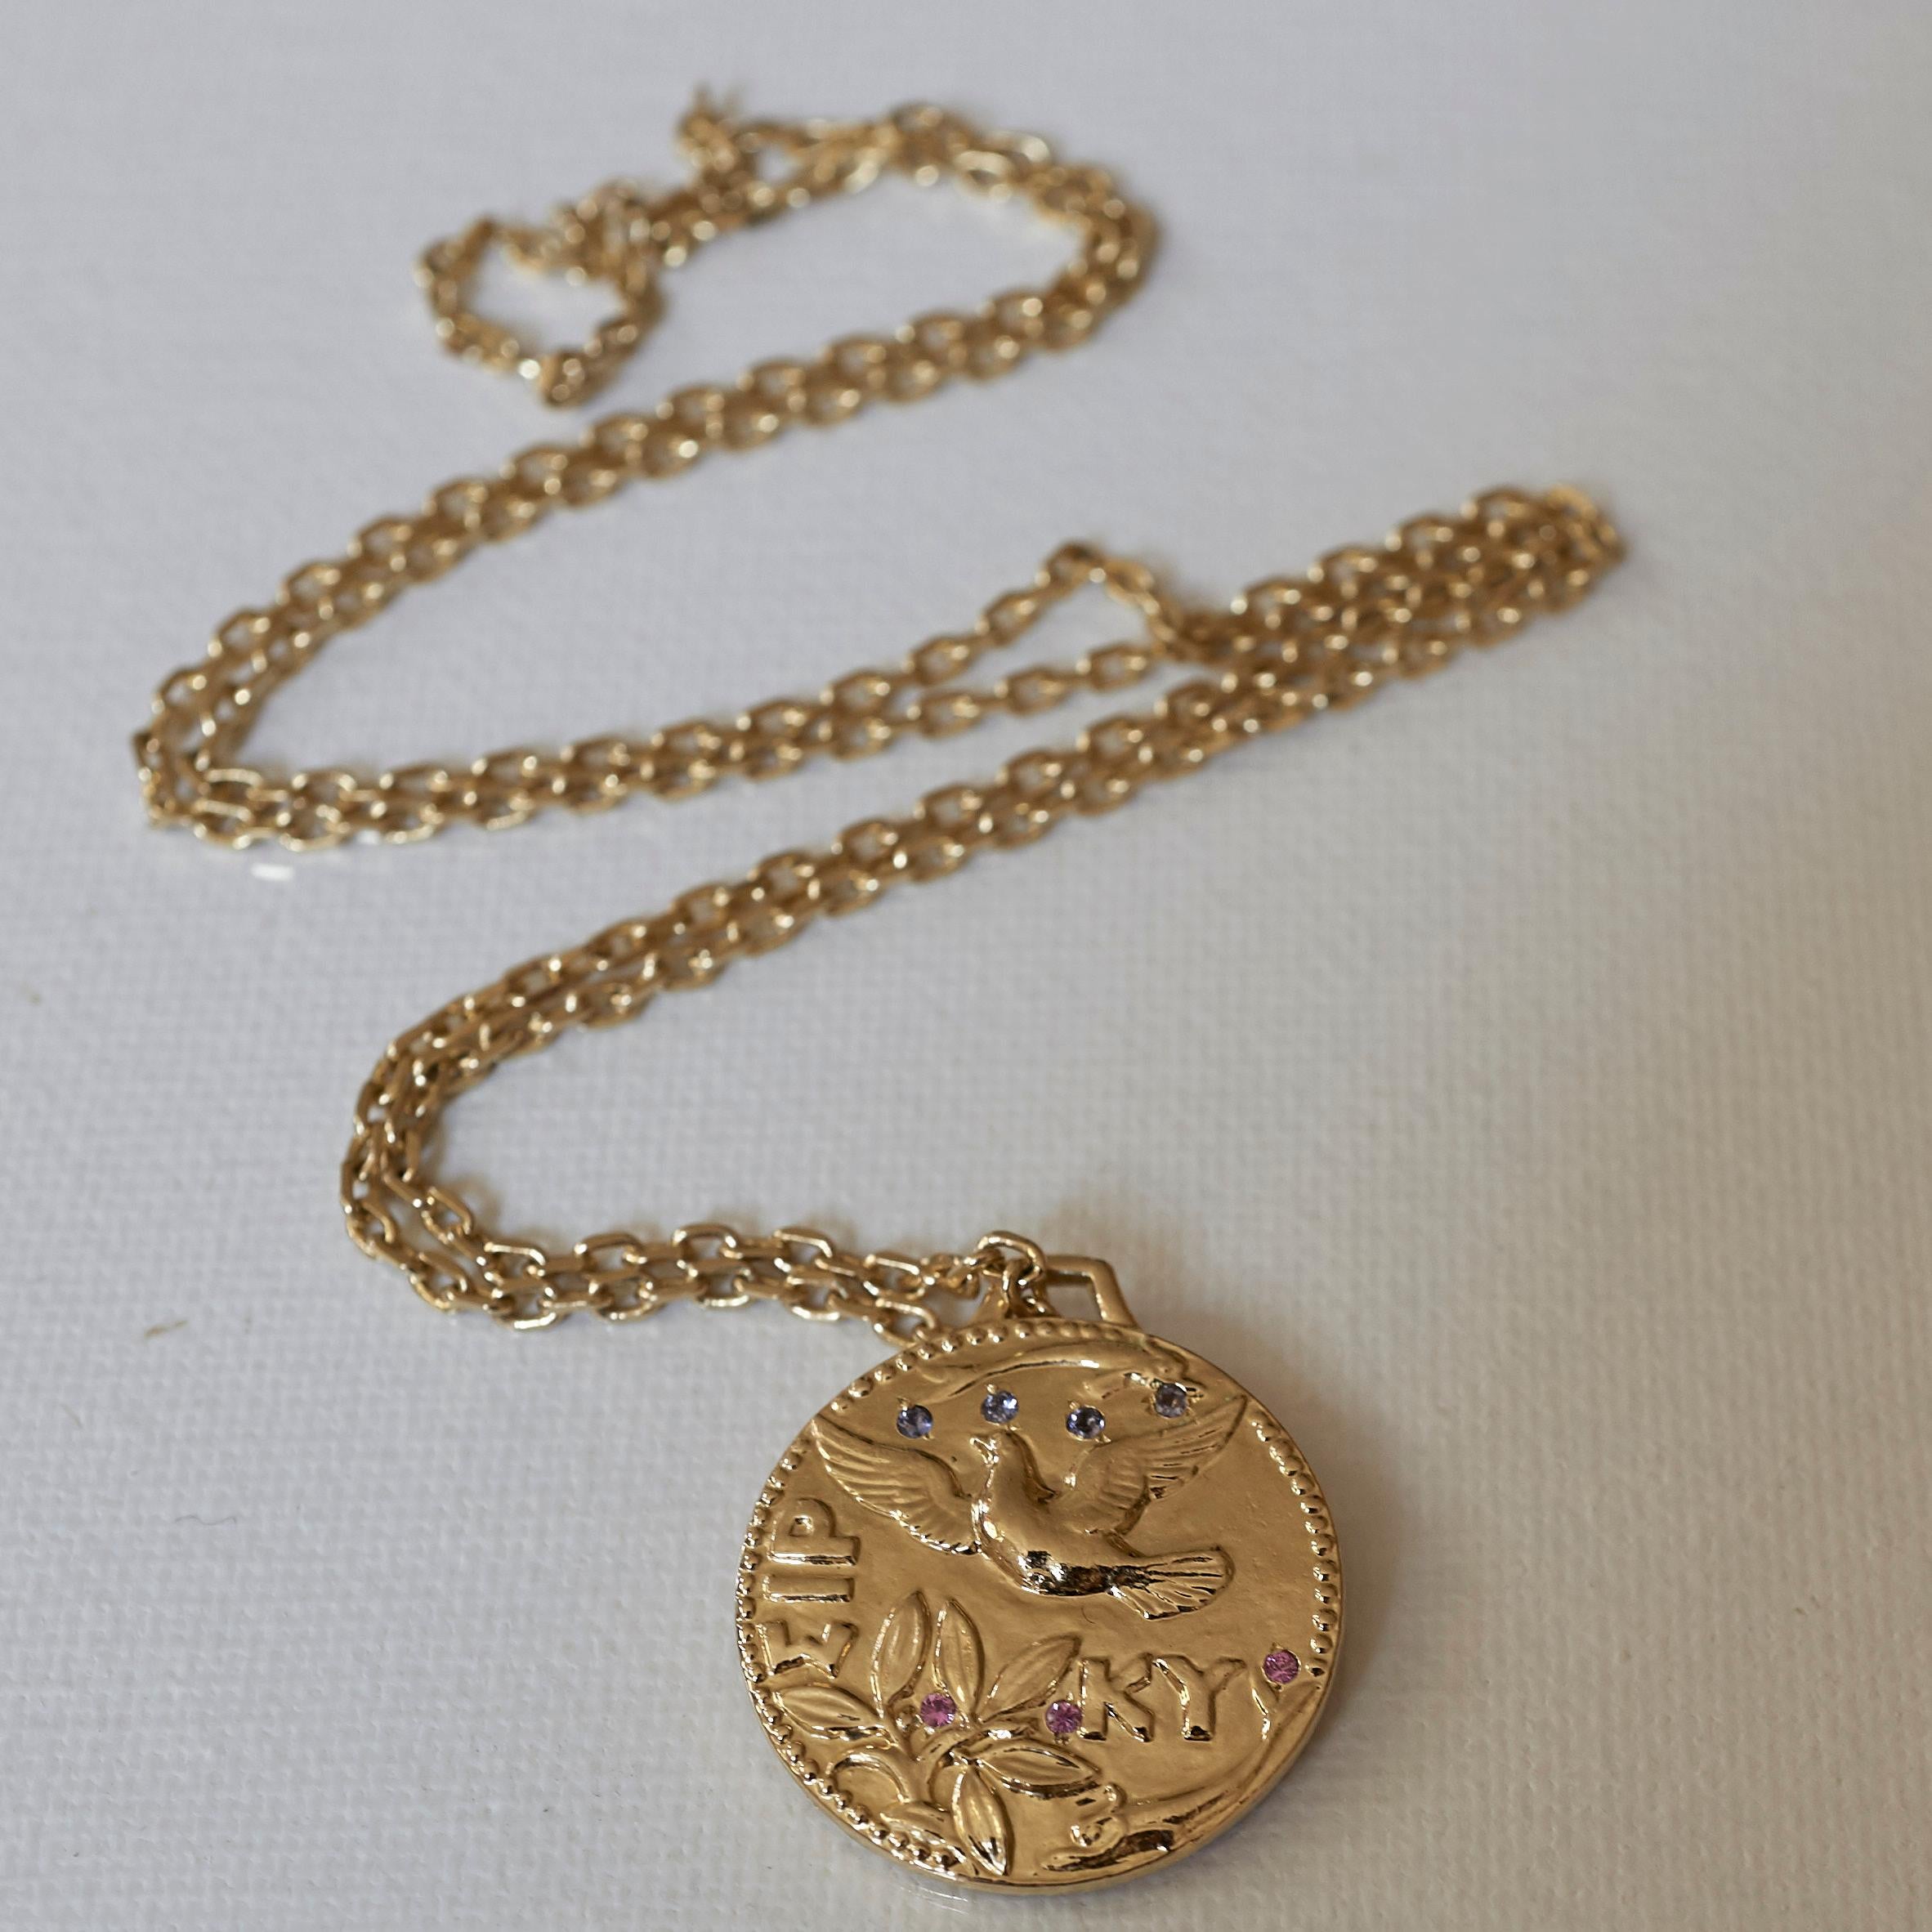 Dove Pegasus Greek Bronze Medal Medal Necklace  3 Pink Sapphires 4 Tanzanites Gold Filled Chain J Dauphin

This piece has two greek coins soldered together with a dove and the other one with a Pegasus. On the side of the dove its has 4 Tanzanites